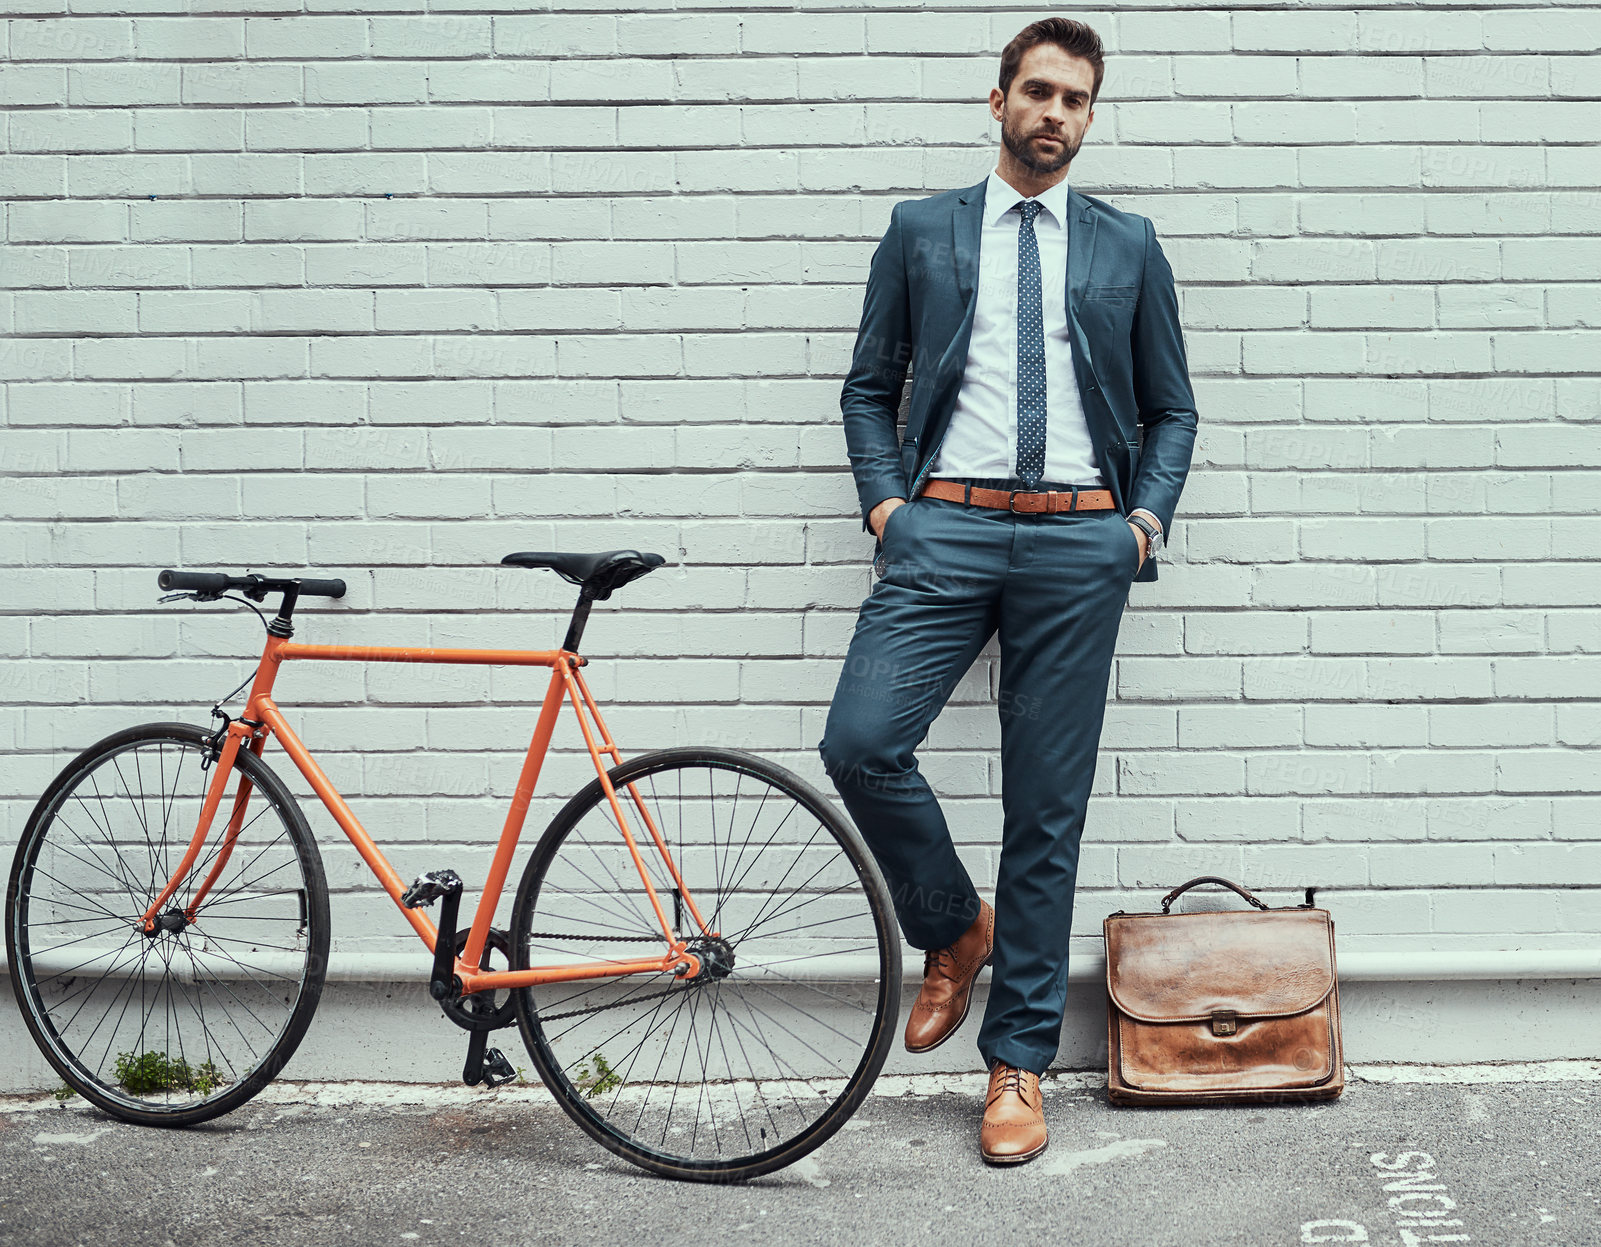 Buy stock photo Portrait of a handsome young businessman standing alongside his bike outdoors